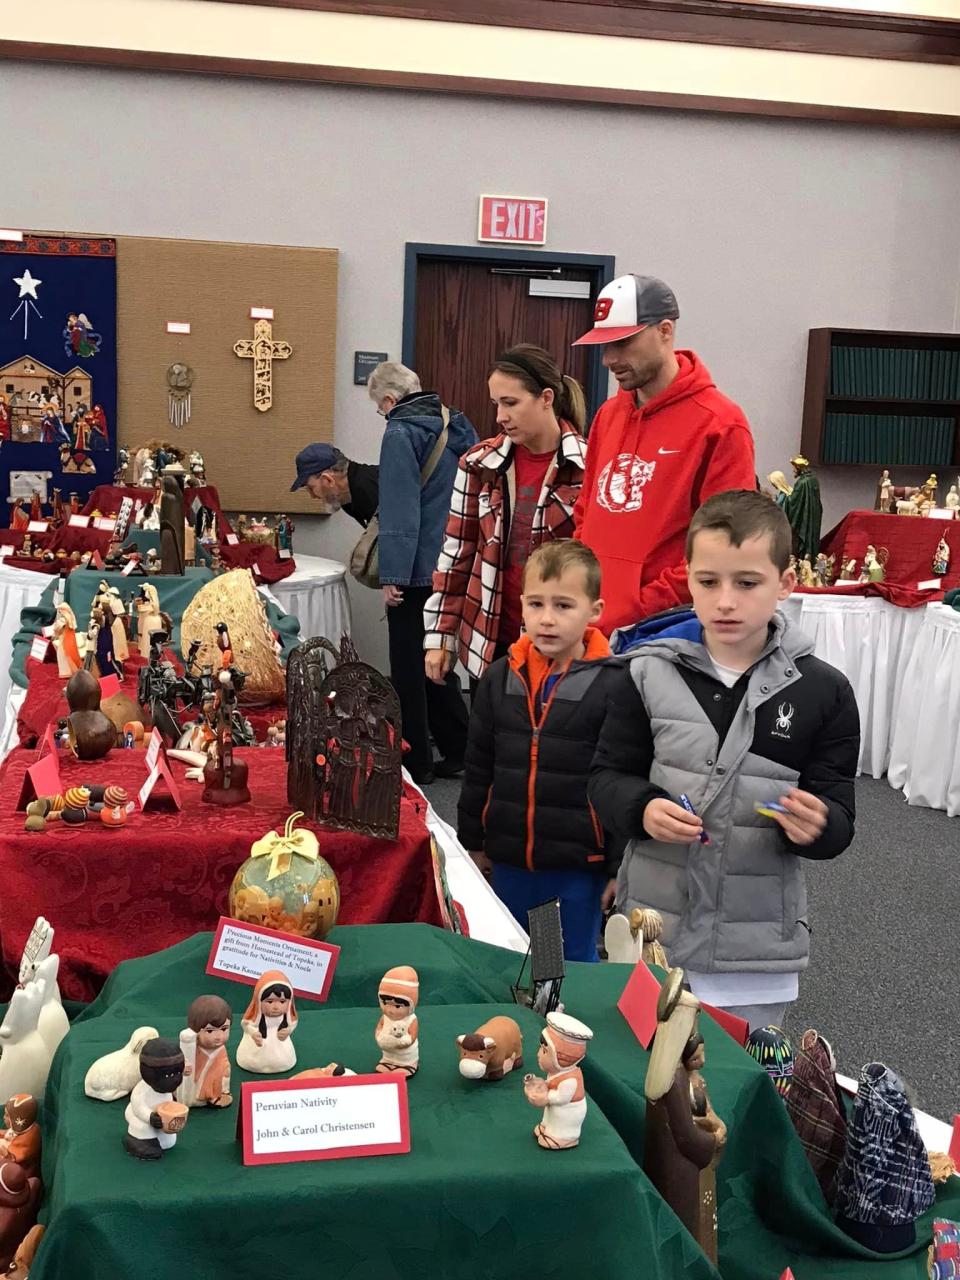 Nativities and Noels returns for the 12th year at the Topeka Stake Center of The Church of Jesus Christ of Latter-day Saints, 2401 S.W. Kingsrow Road. The three-day event will be Dec. 1-3 and feature hundreds of nativity scenes.